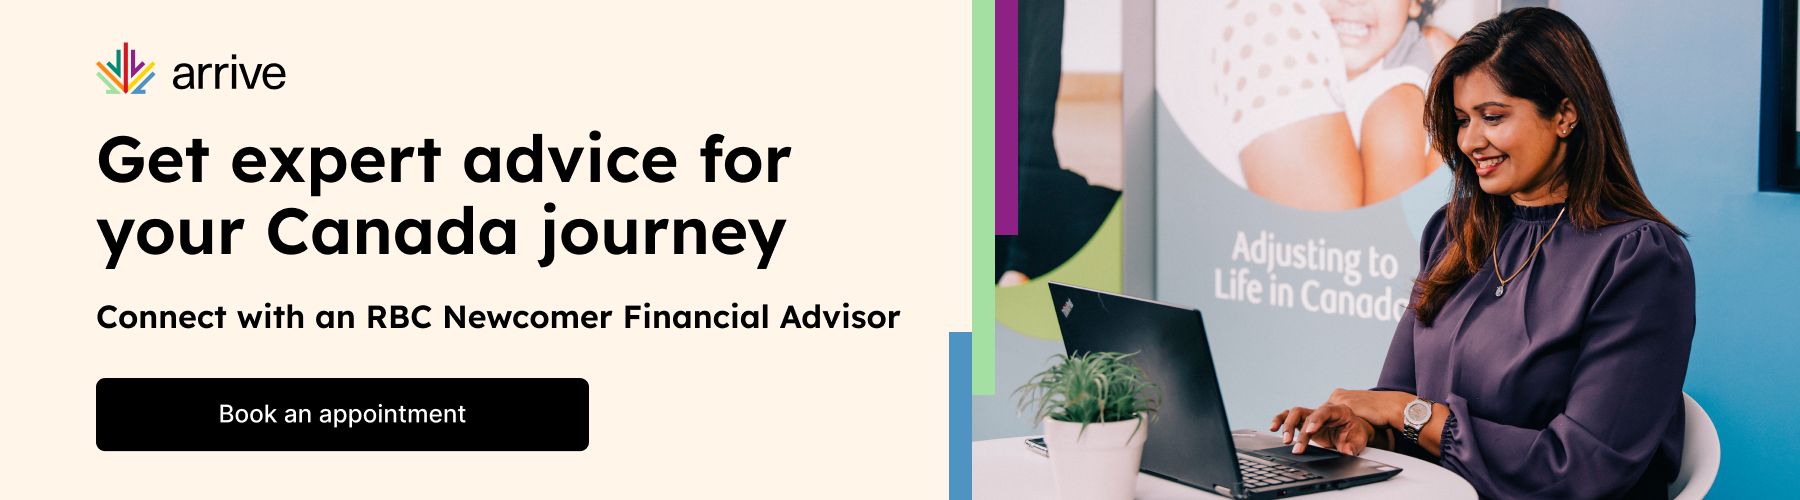 Book an appointment with an RBC Newcomer Financial Advisor